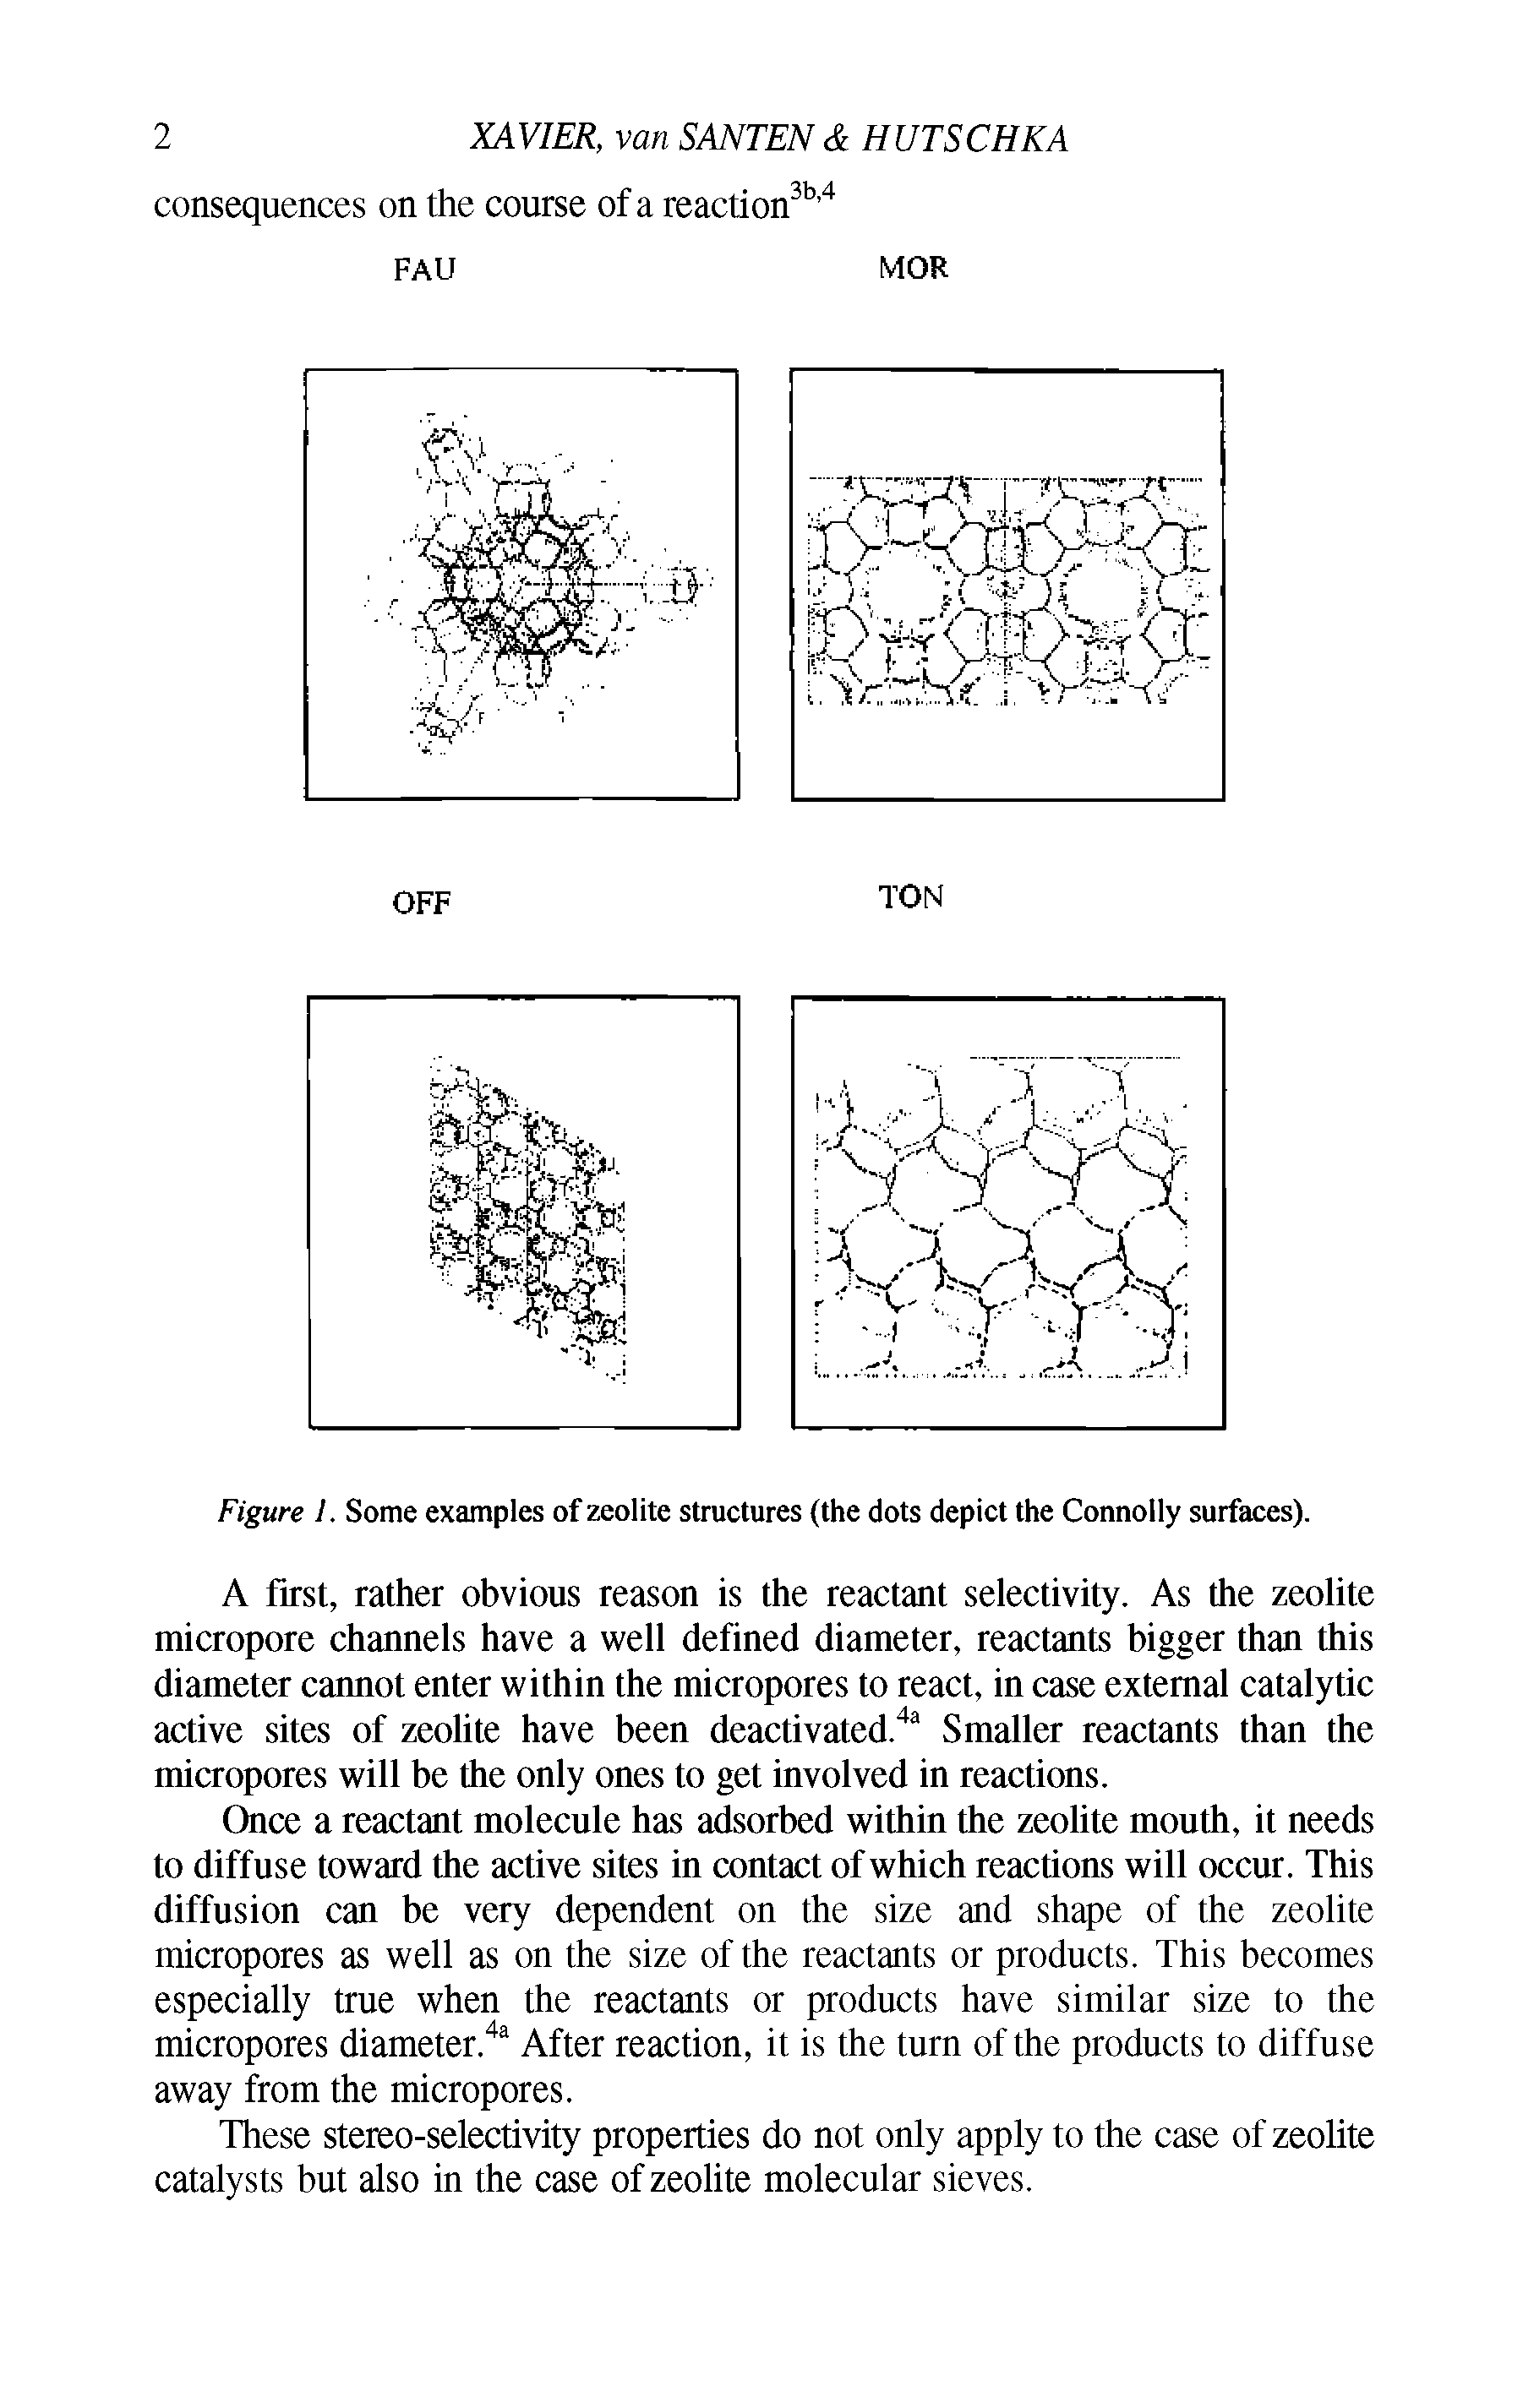 Figure I. Some examples of zeolite structures (the dots depict the Connolly surfaces).